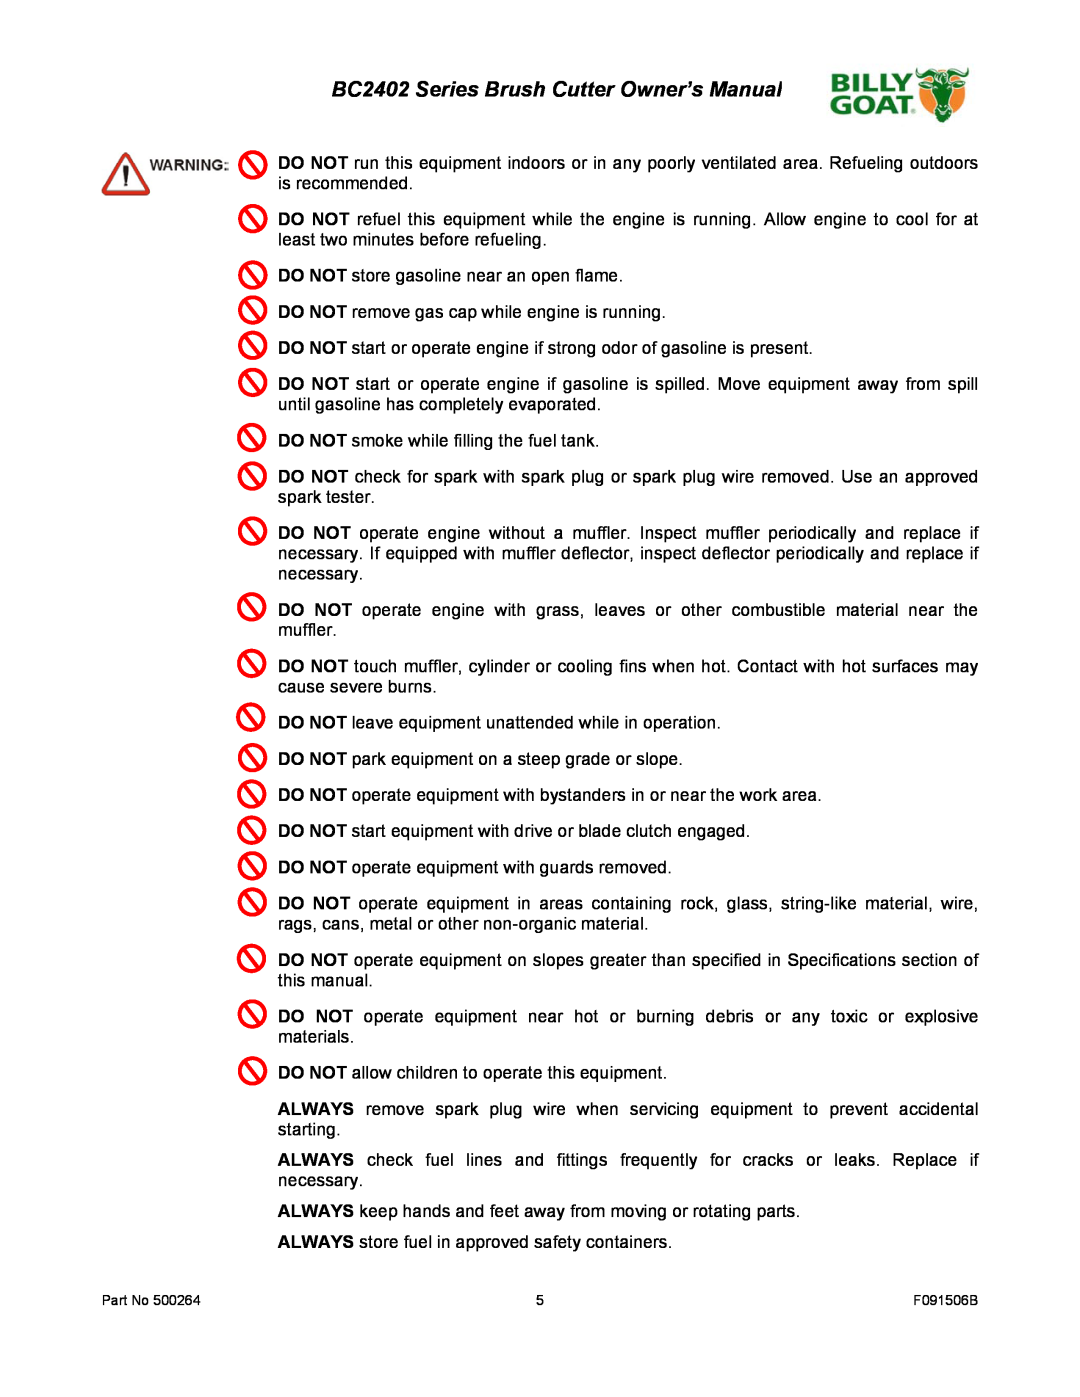 Billy Goat BC2402 owner manual DO NOT store gasoline near an open flame 